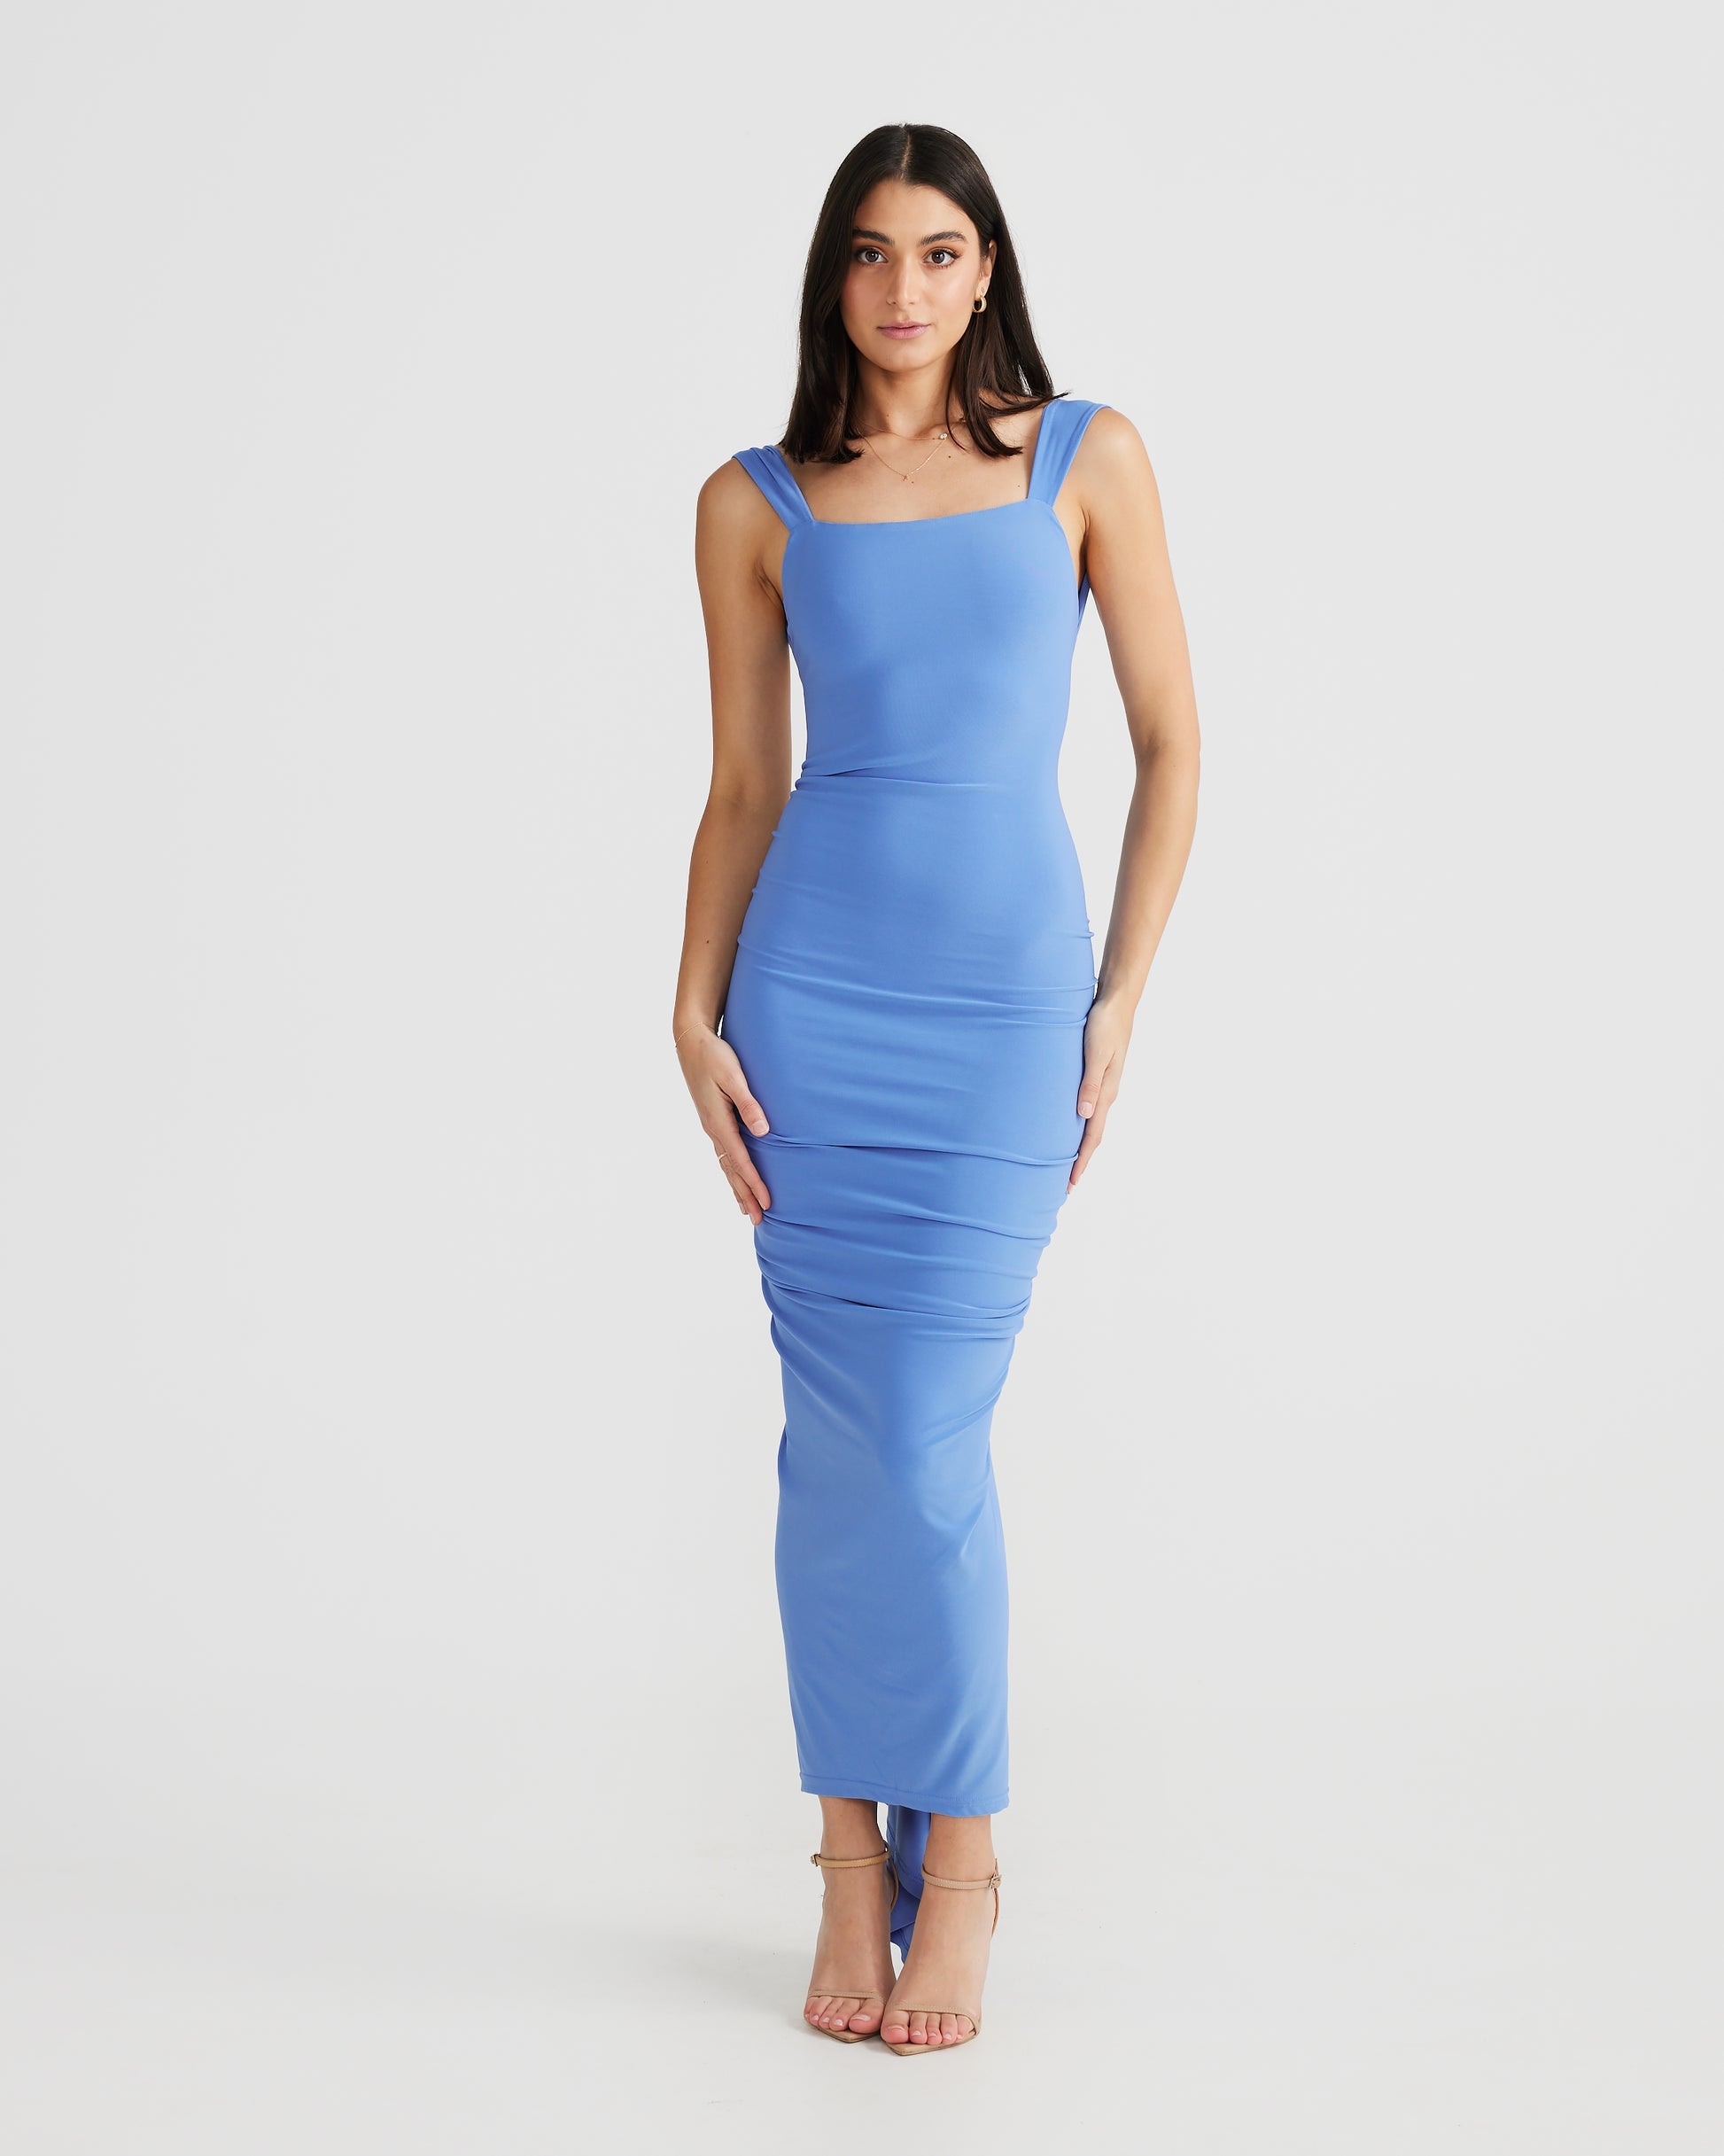 MÉLANI The Label SABIA Ocean Blue Ruched Bum Backless Dress